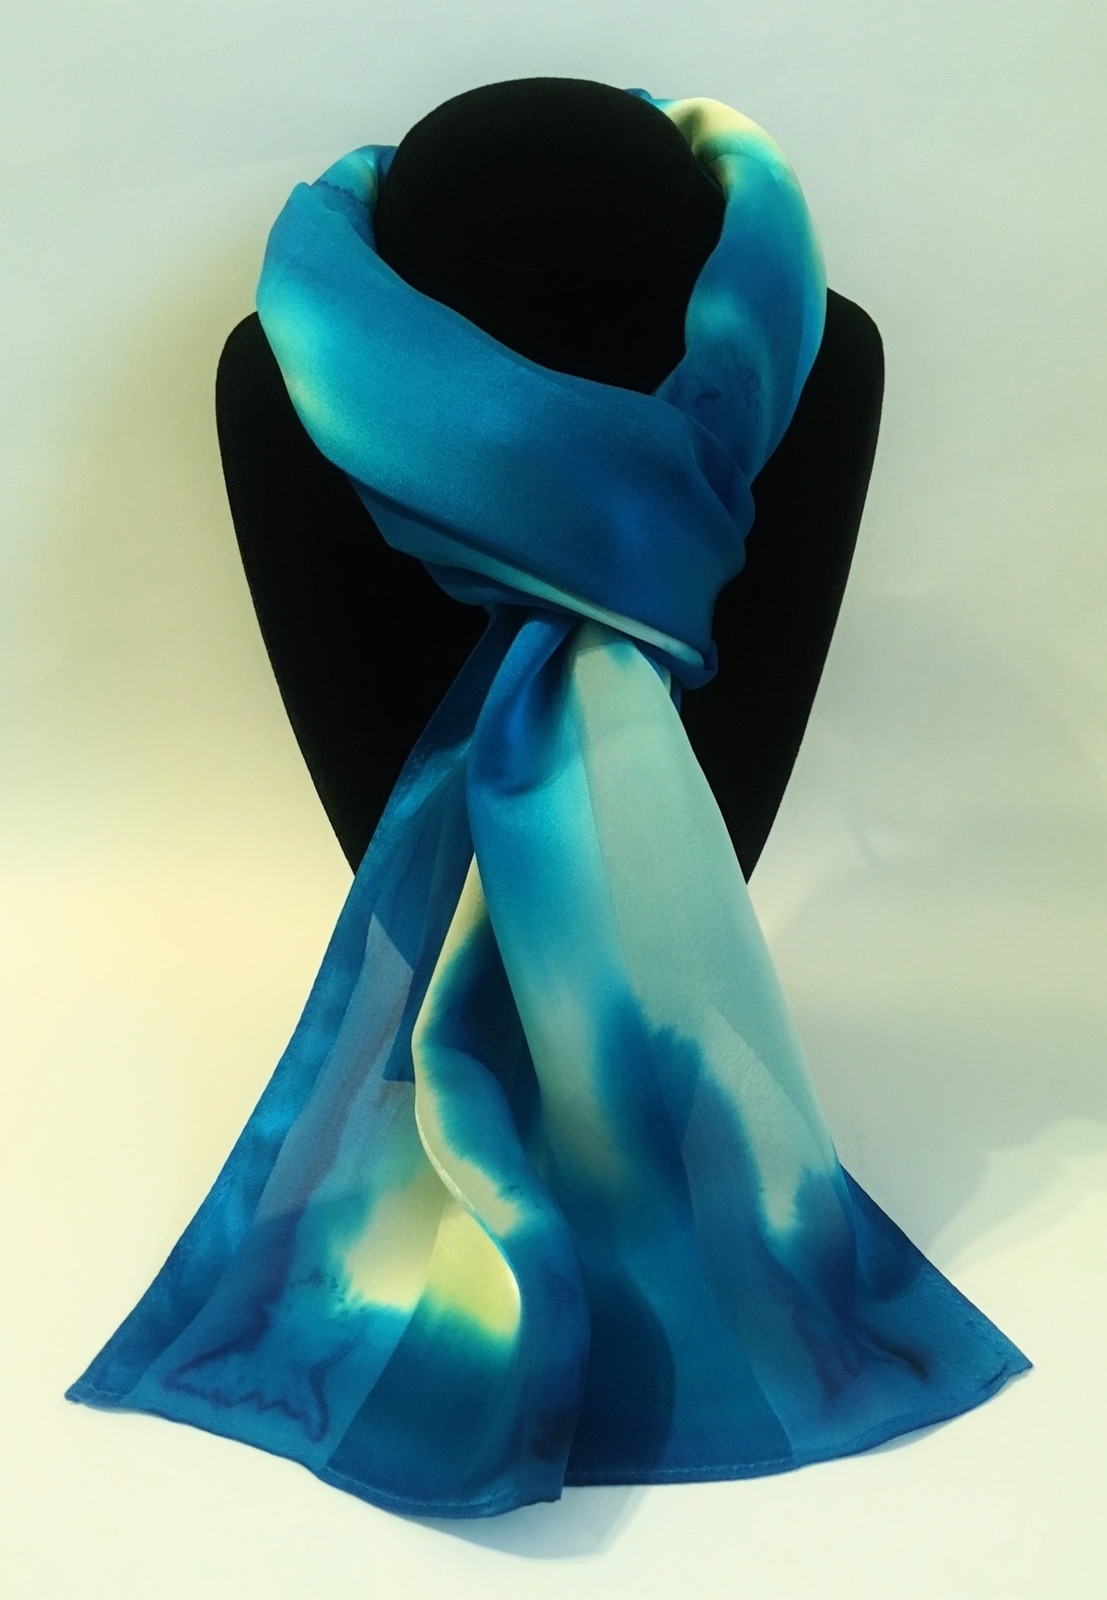 Primary image for Hand Painted Silk Scarf Turquoise Seafoam Blue Green Cream Unique Oblong Gift